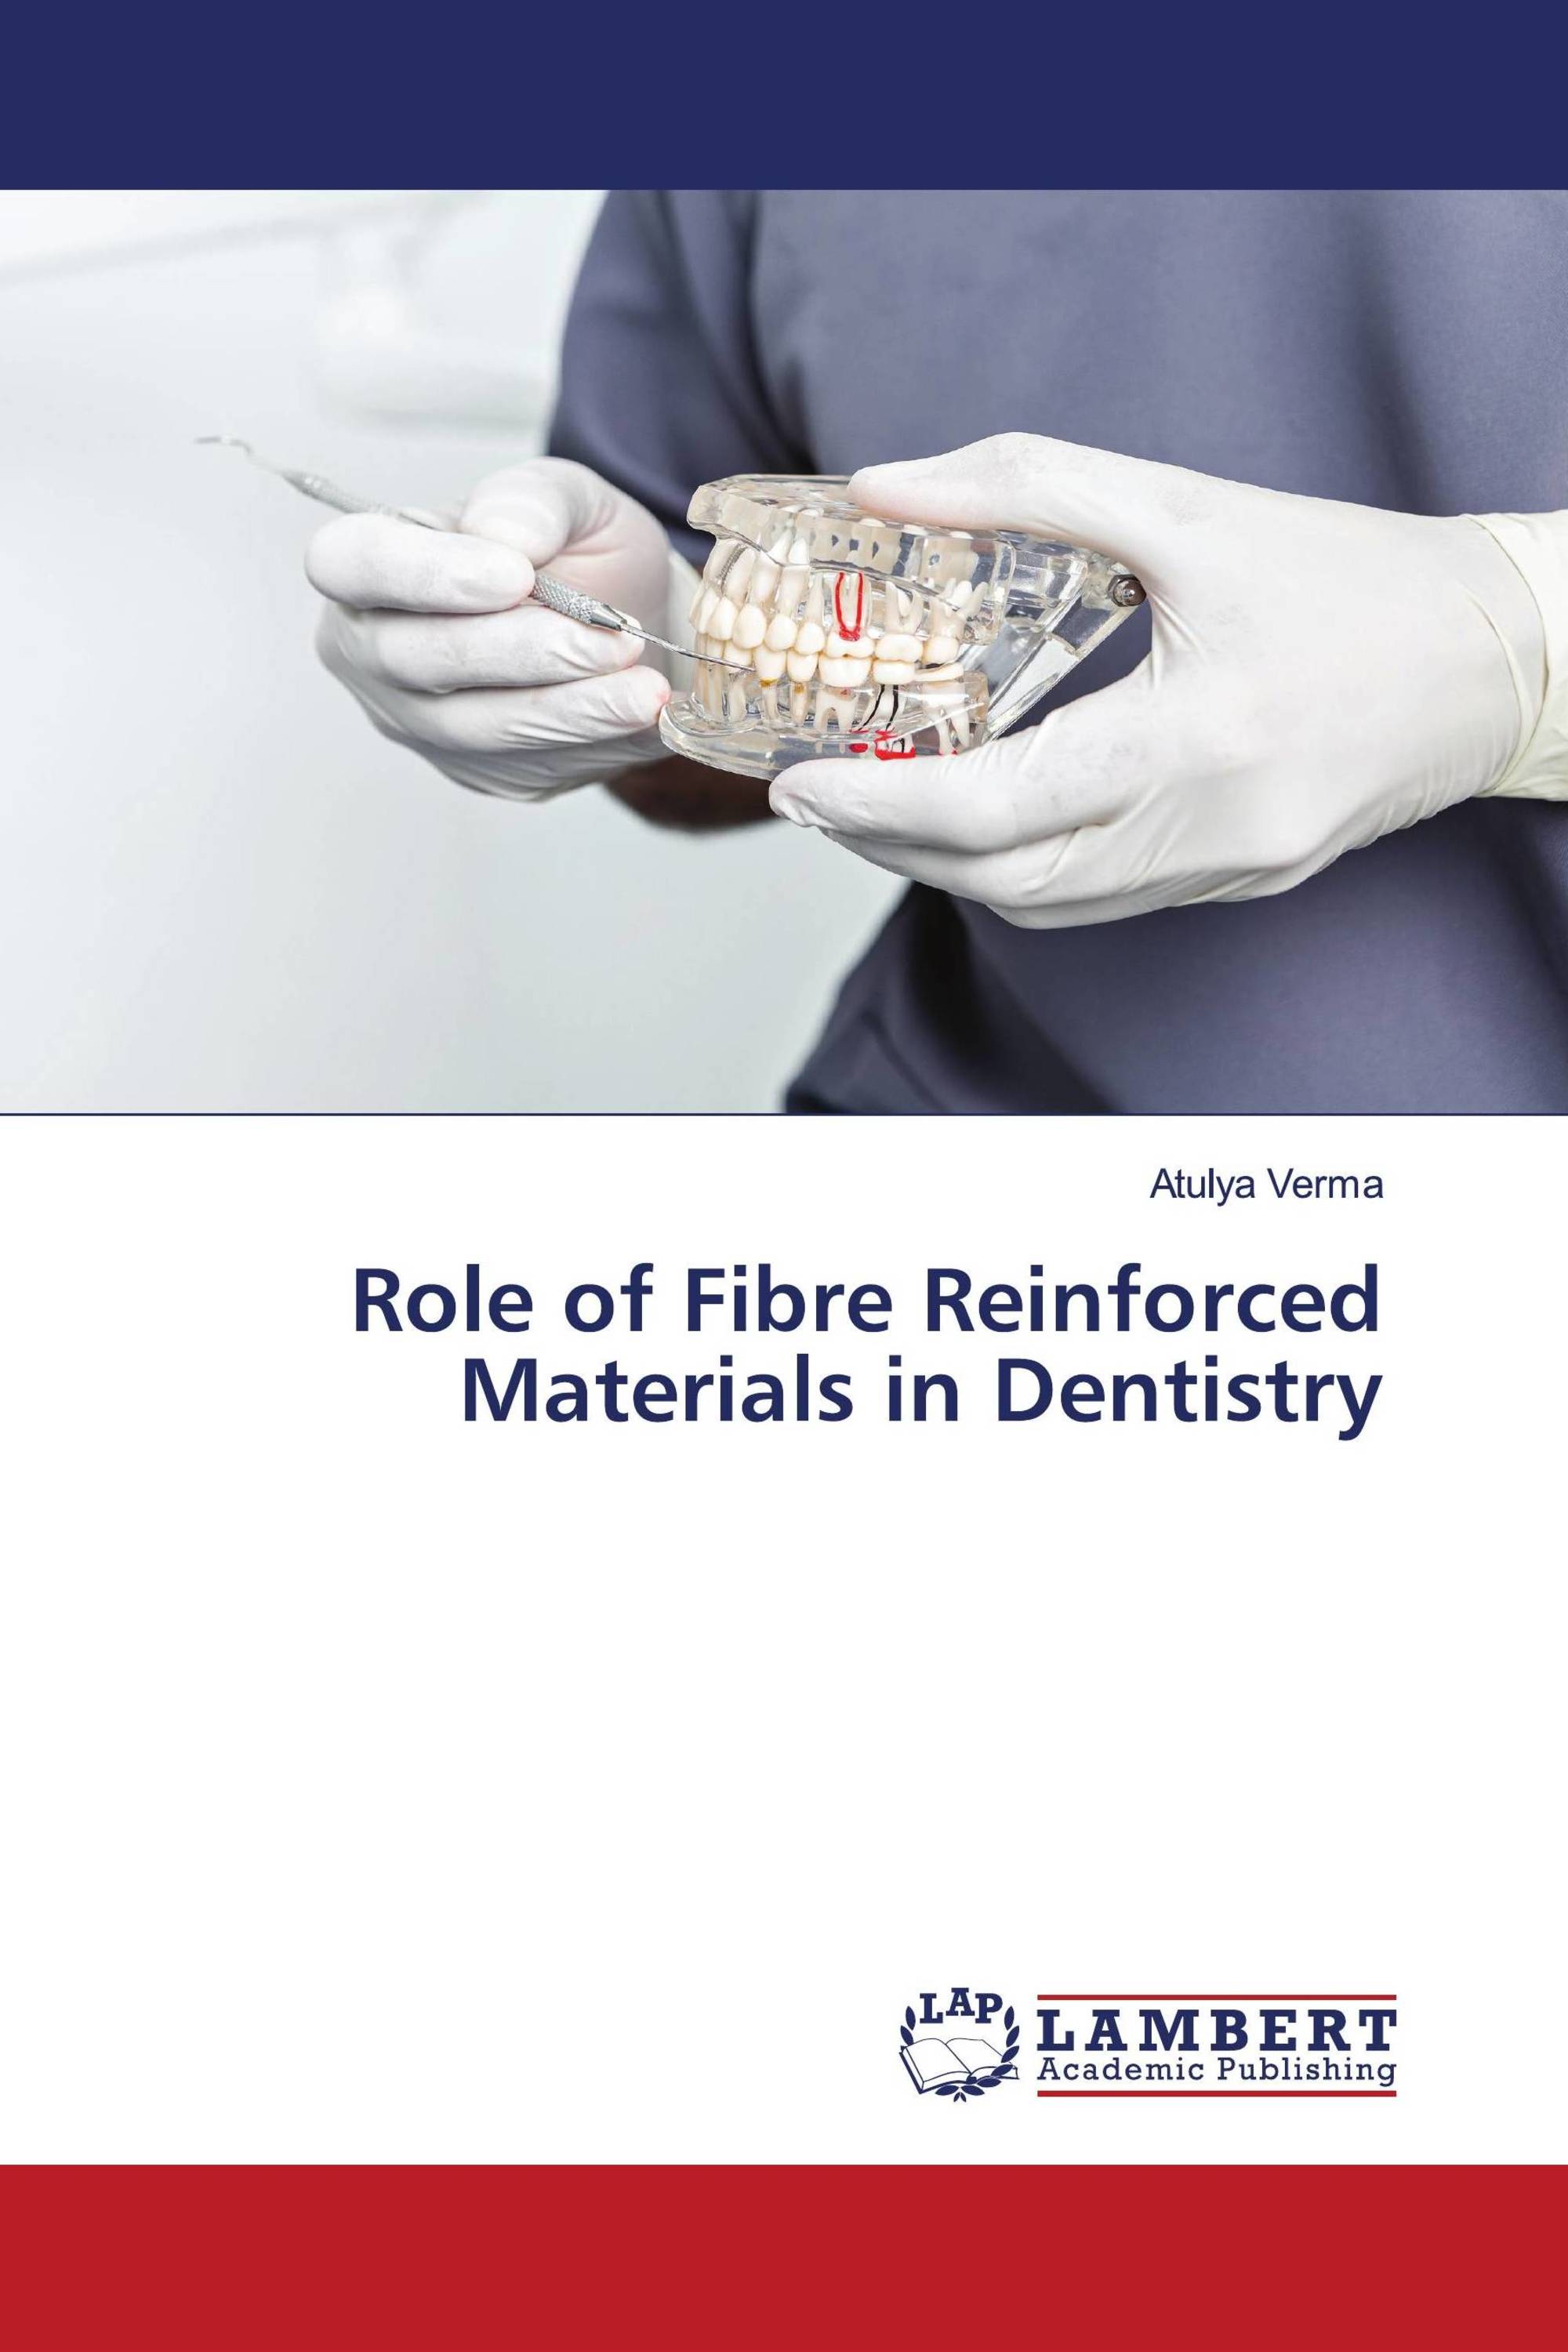 Role of Fibre Reinforced Materials in Dentistry